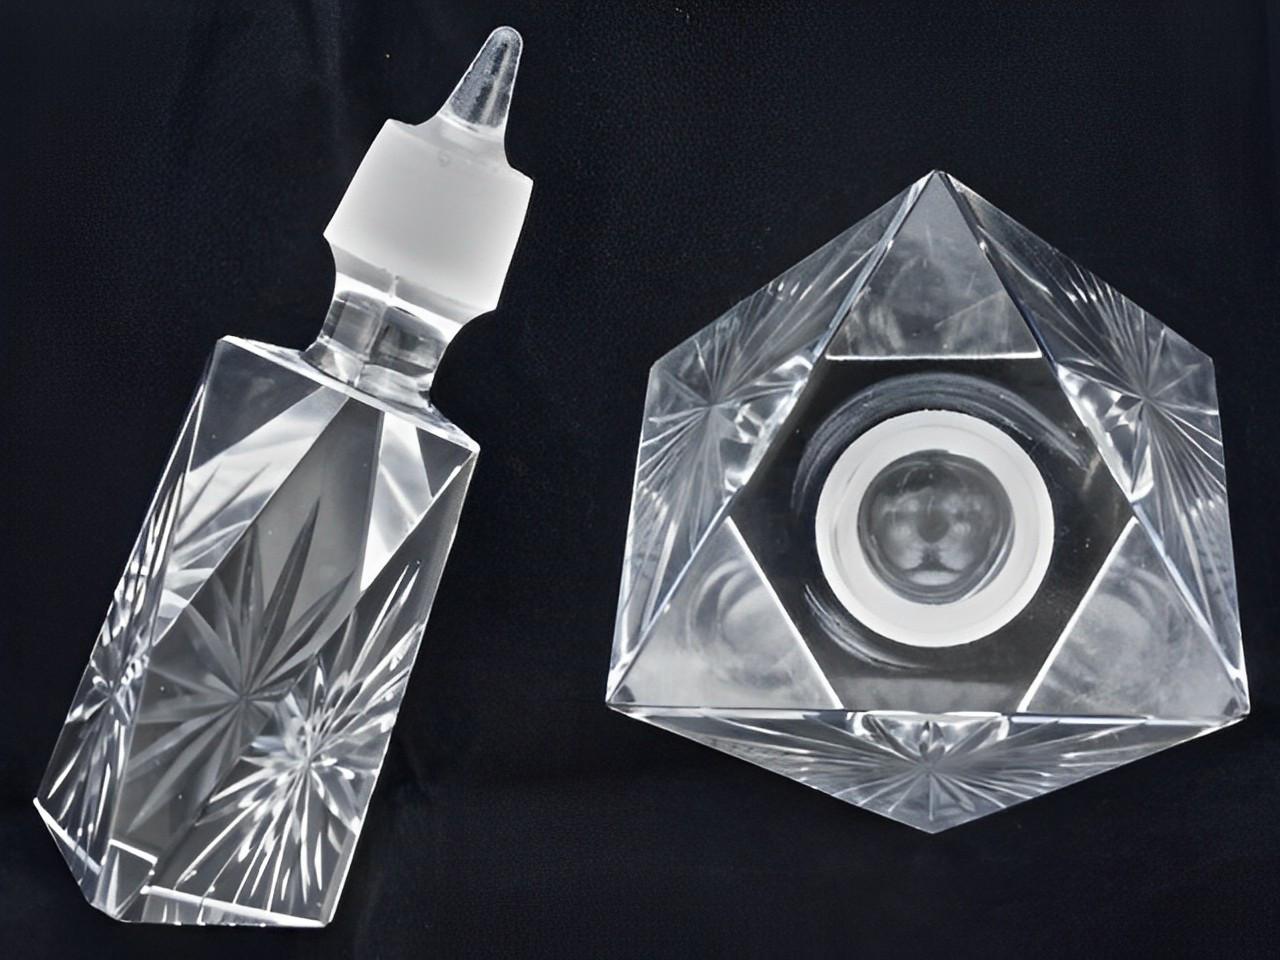 Mid-20th Century Cut Lead Crystal Perfume Bottle with a Star Design circa 1950s For Sale